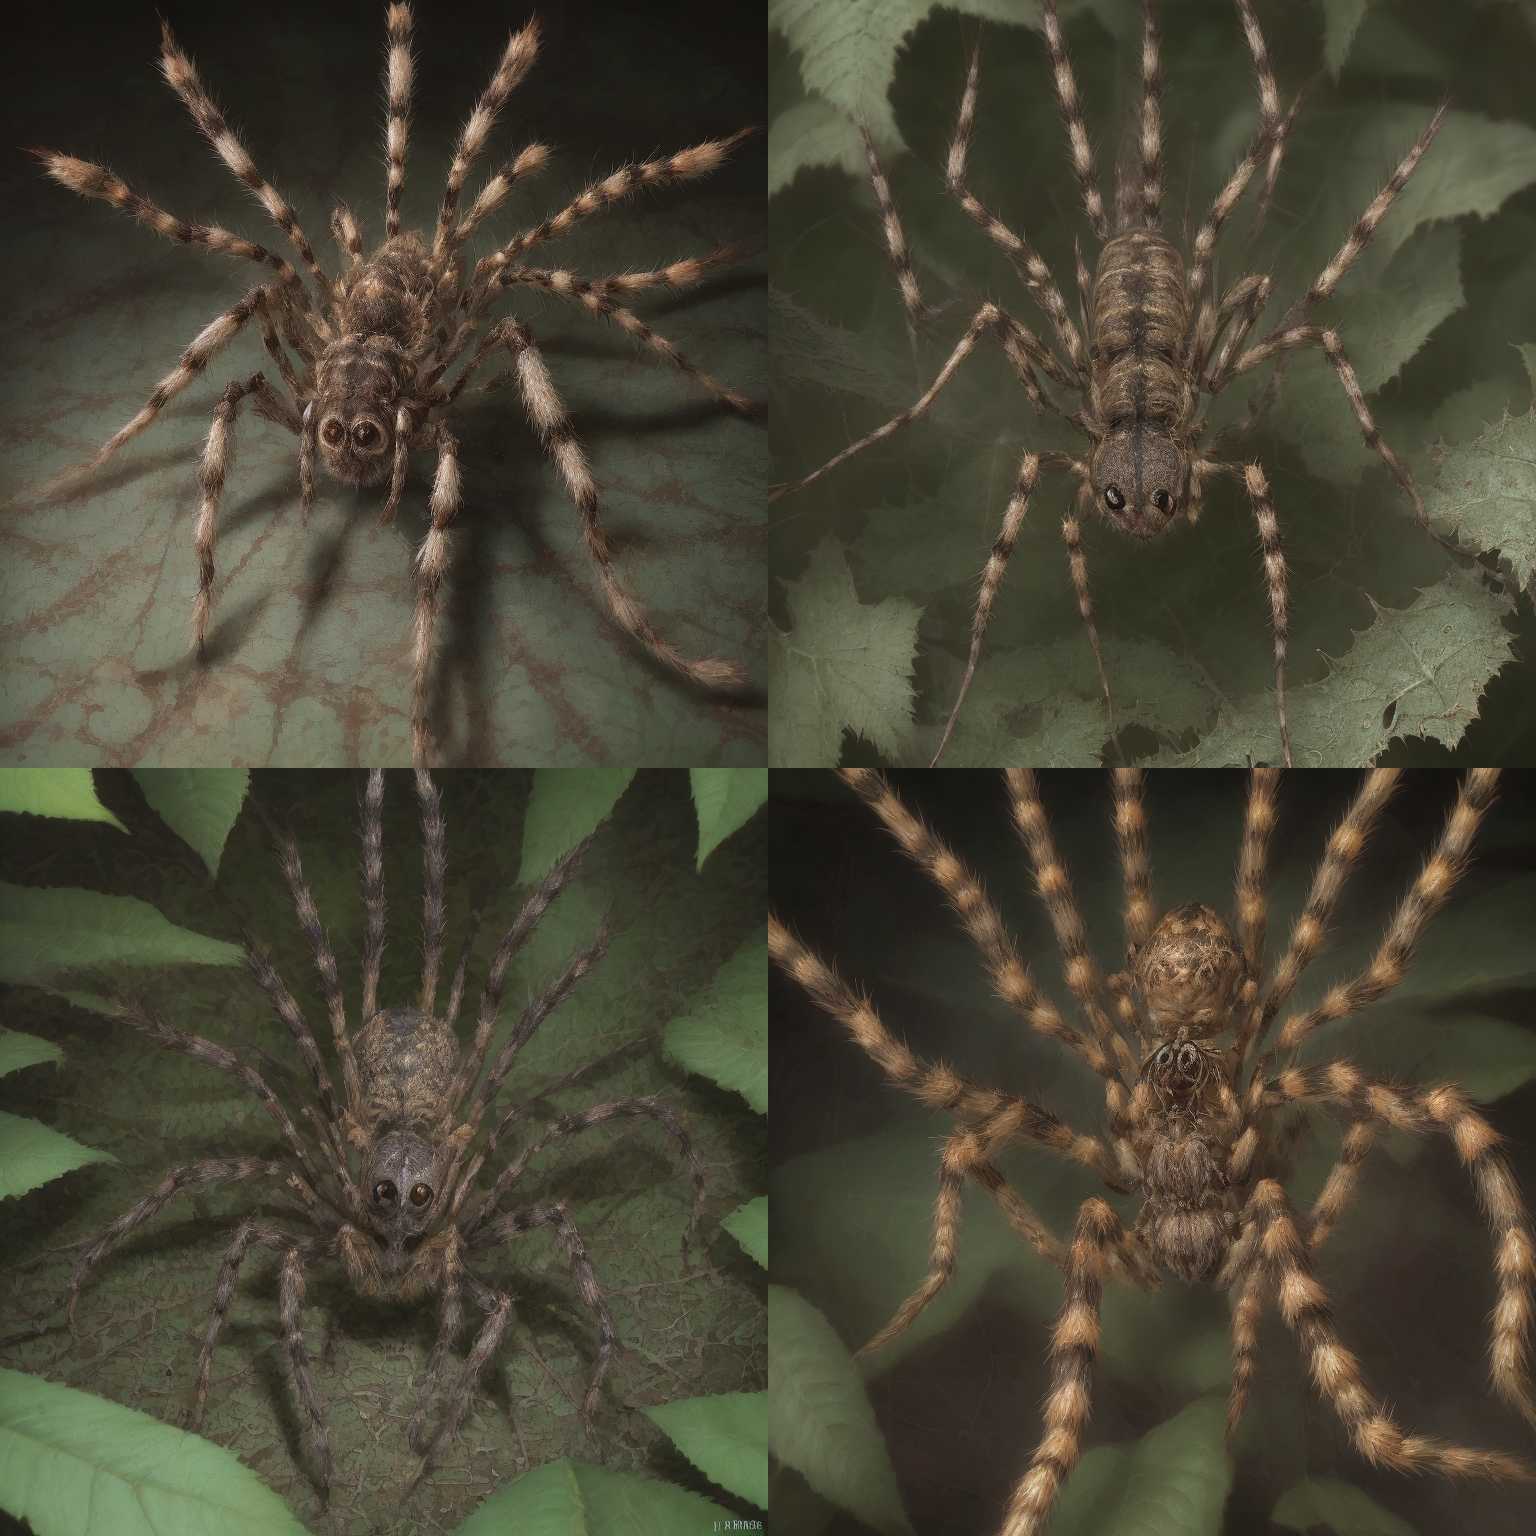 A spider exploring its surroundings